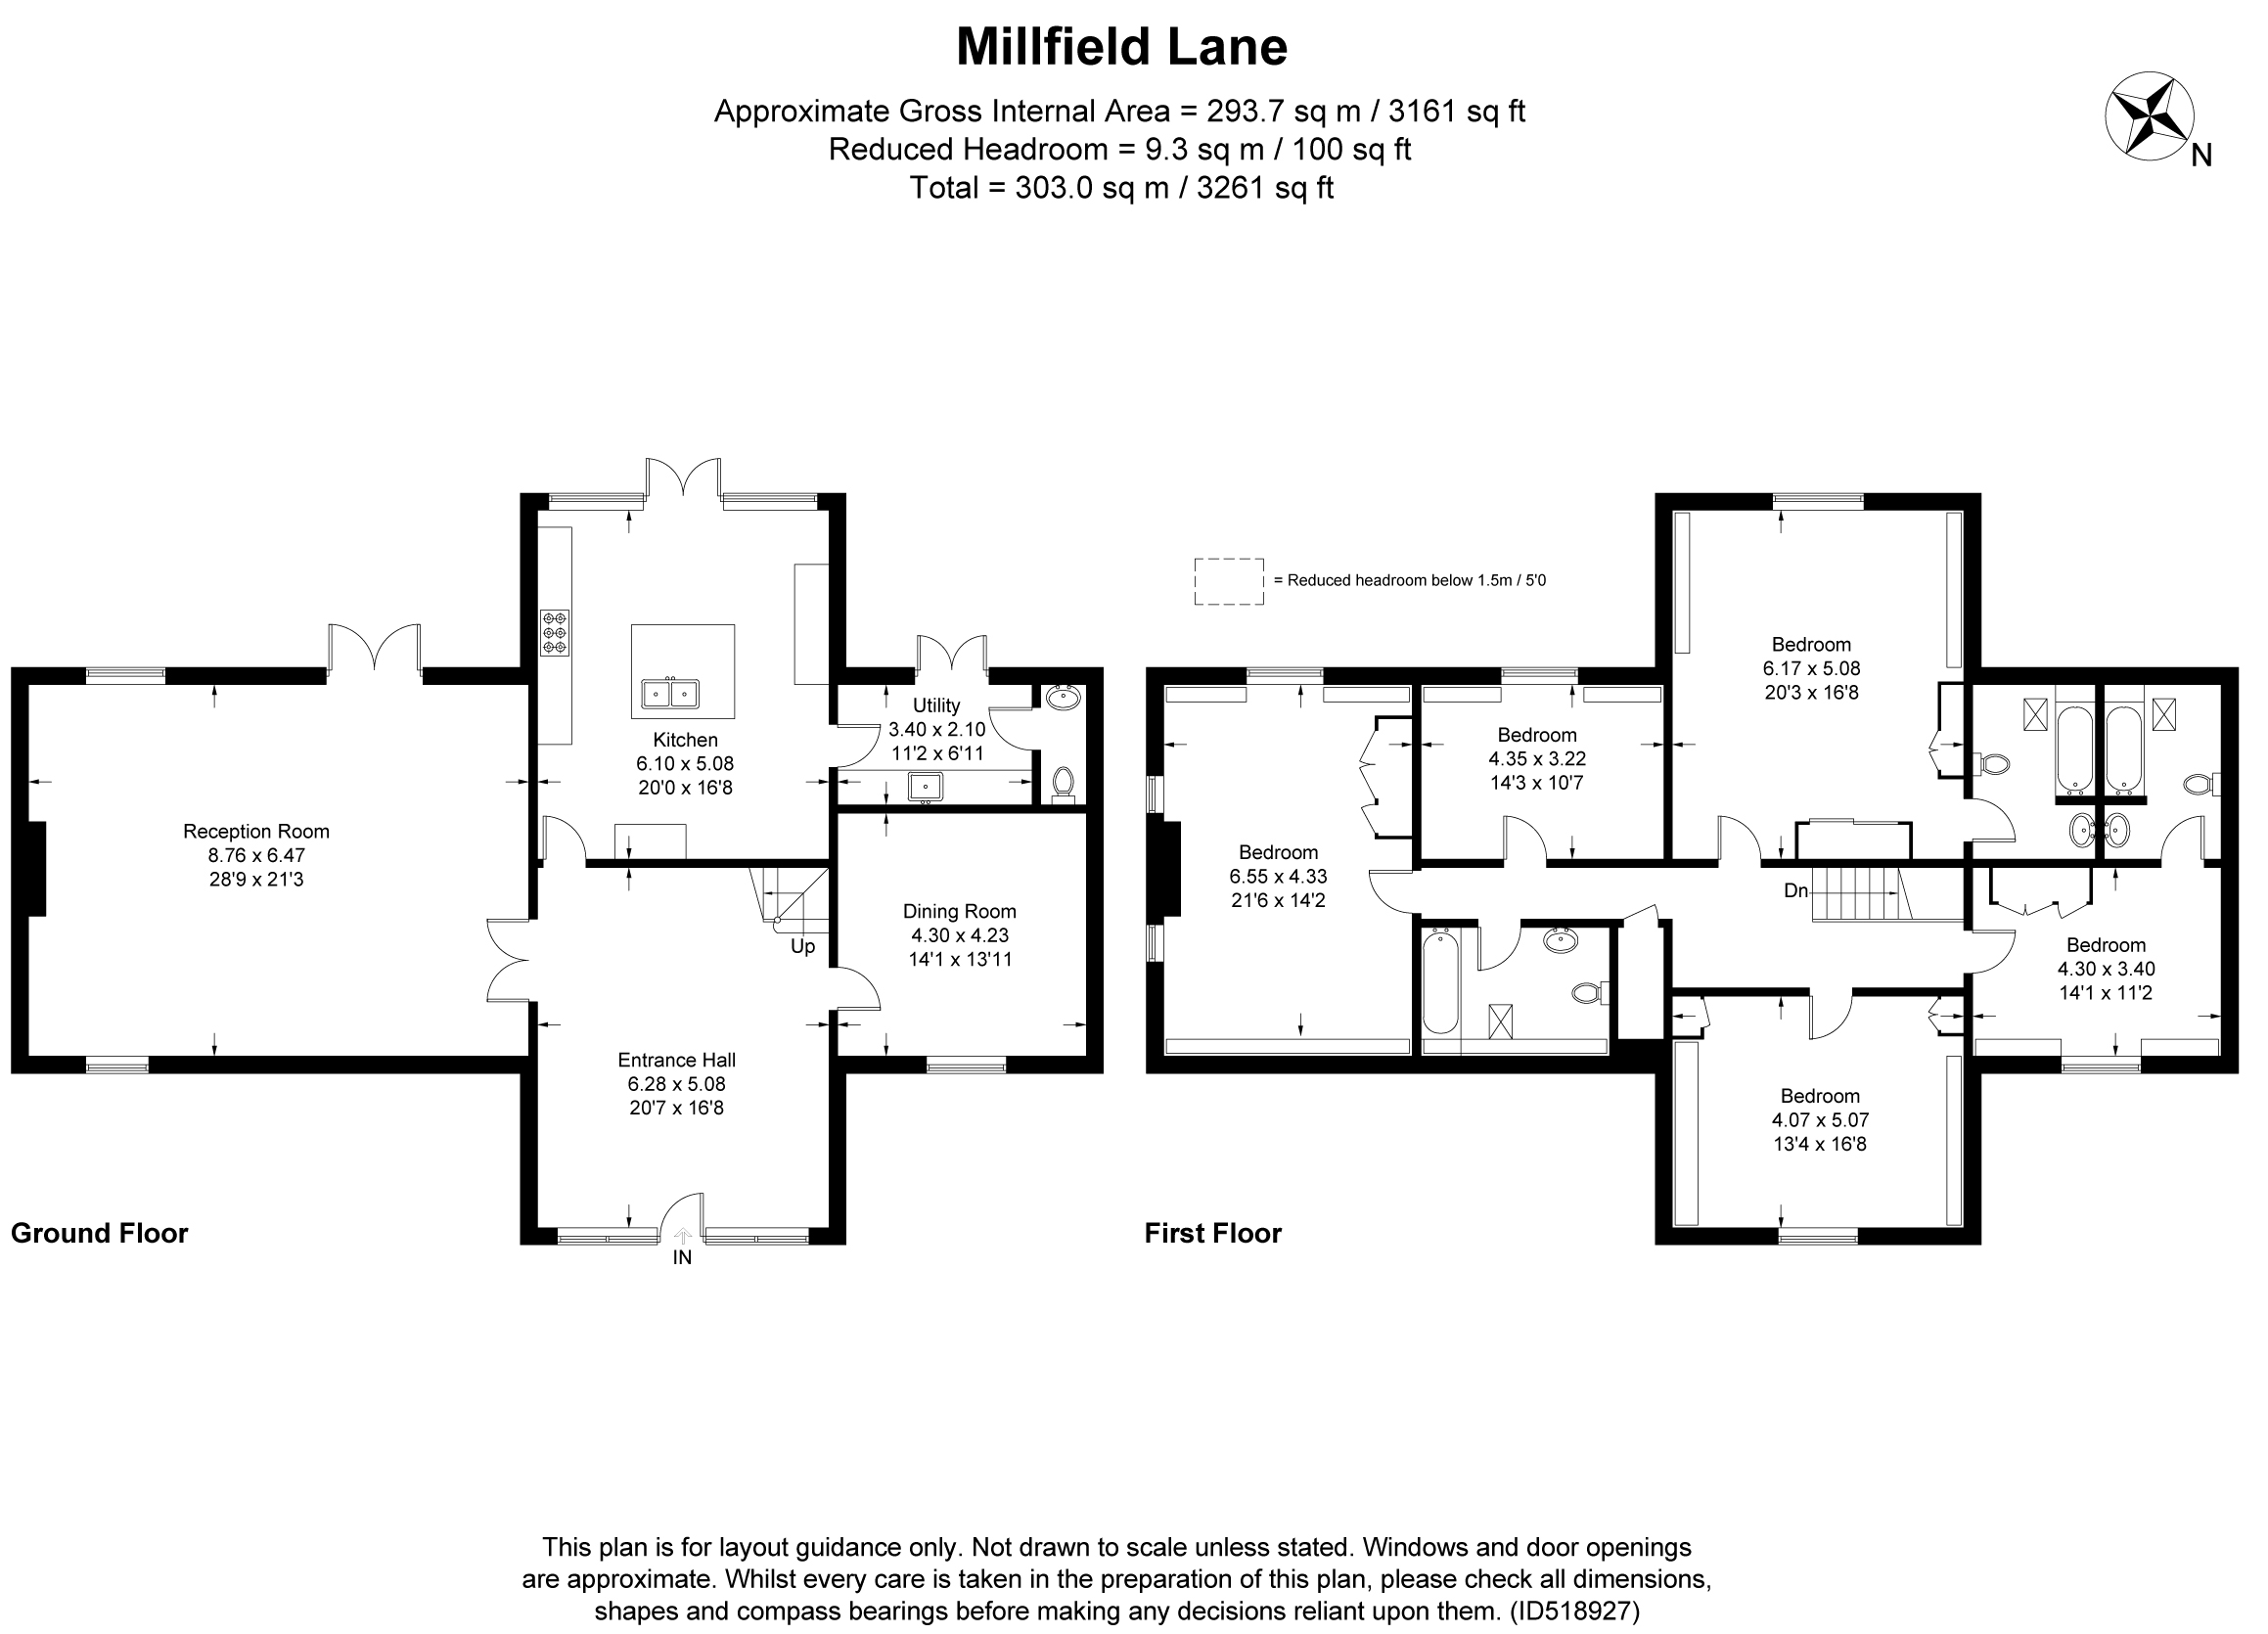 5 Bedrooms Semi-detached house to rent in Millfield Lane, Markyate, St.Albans AL3